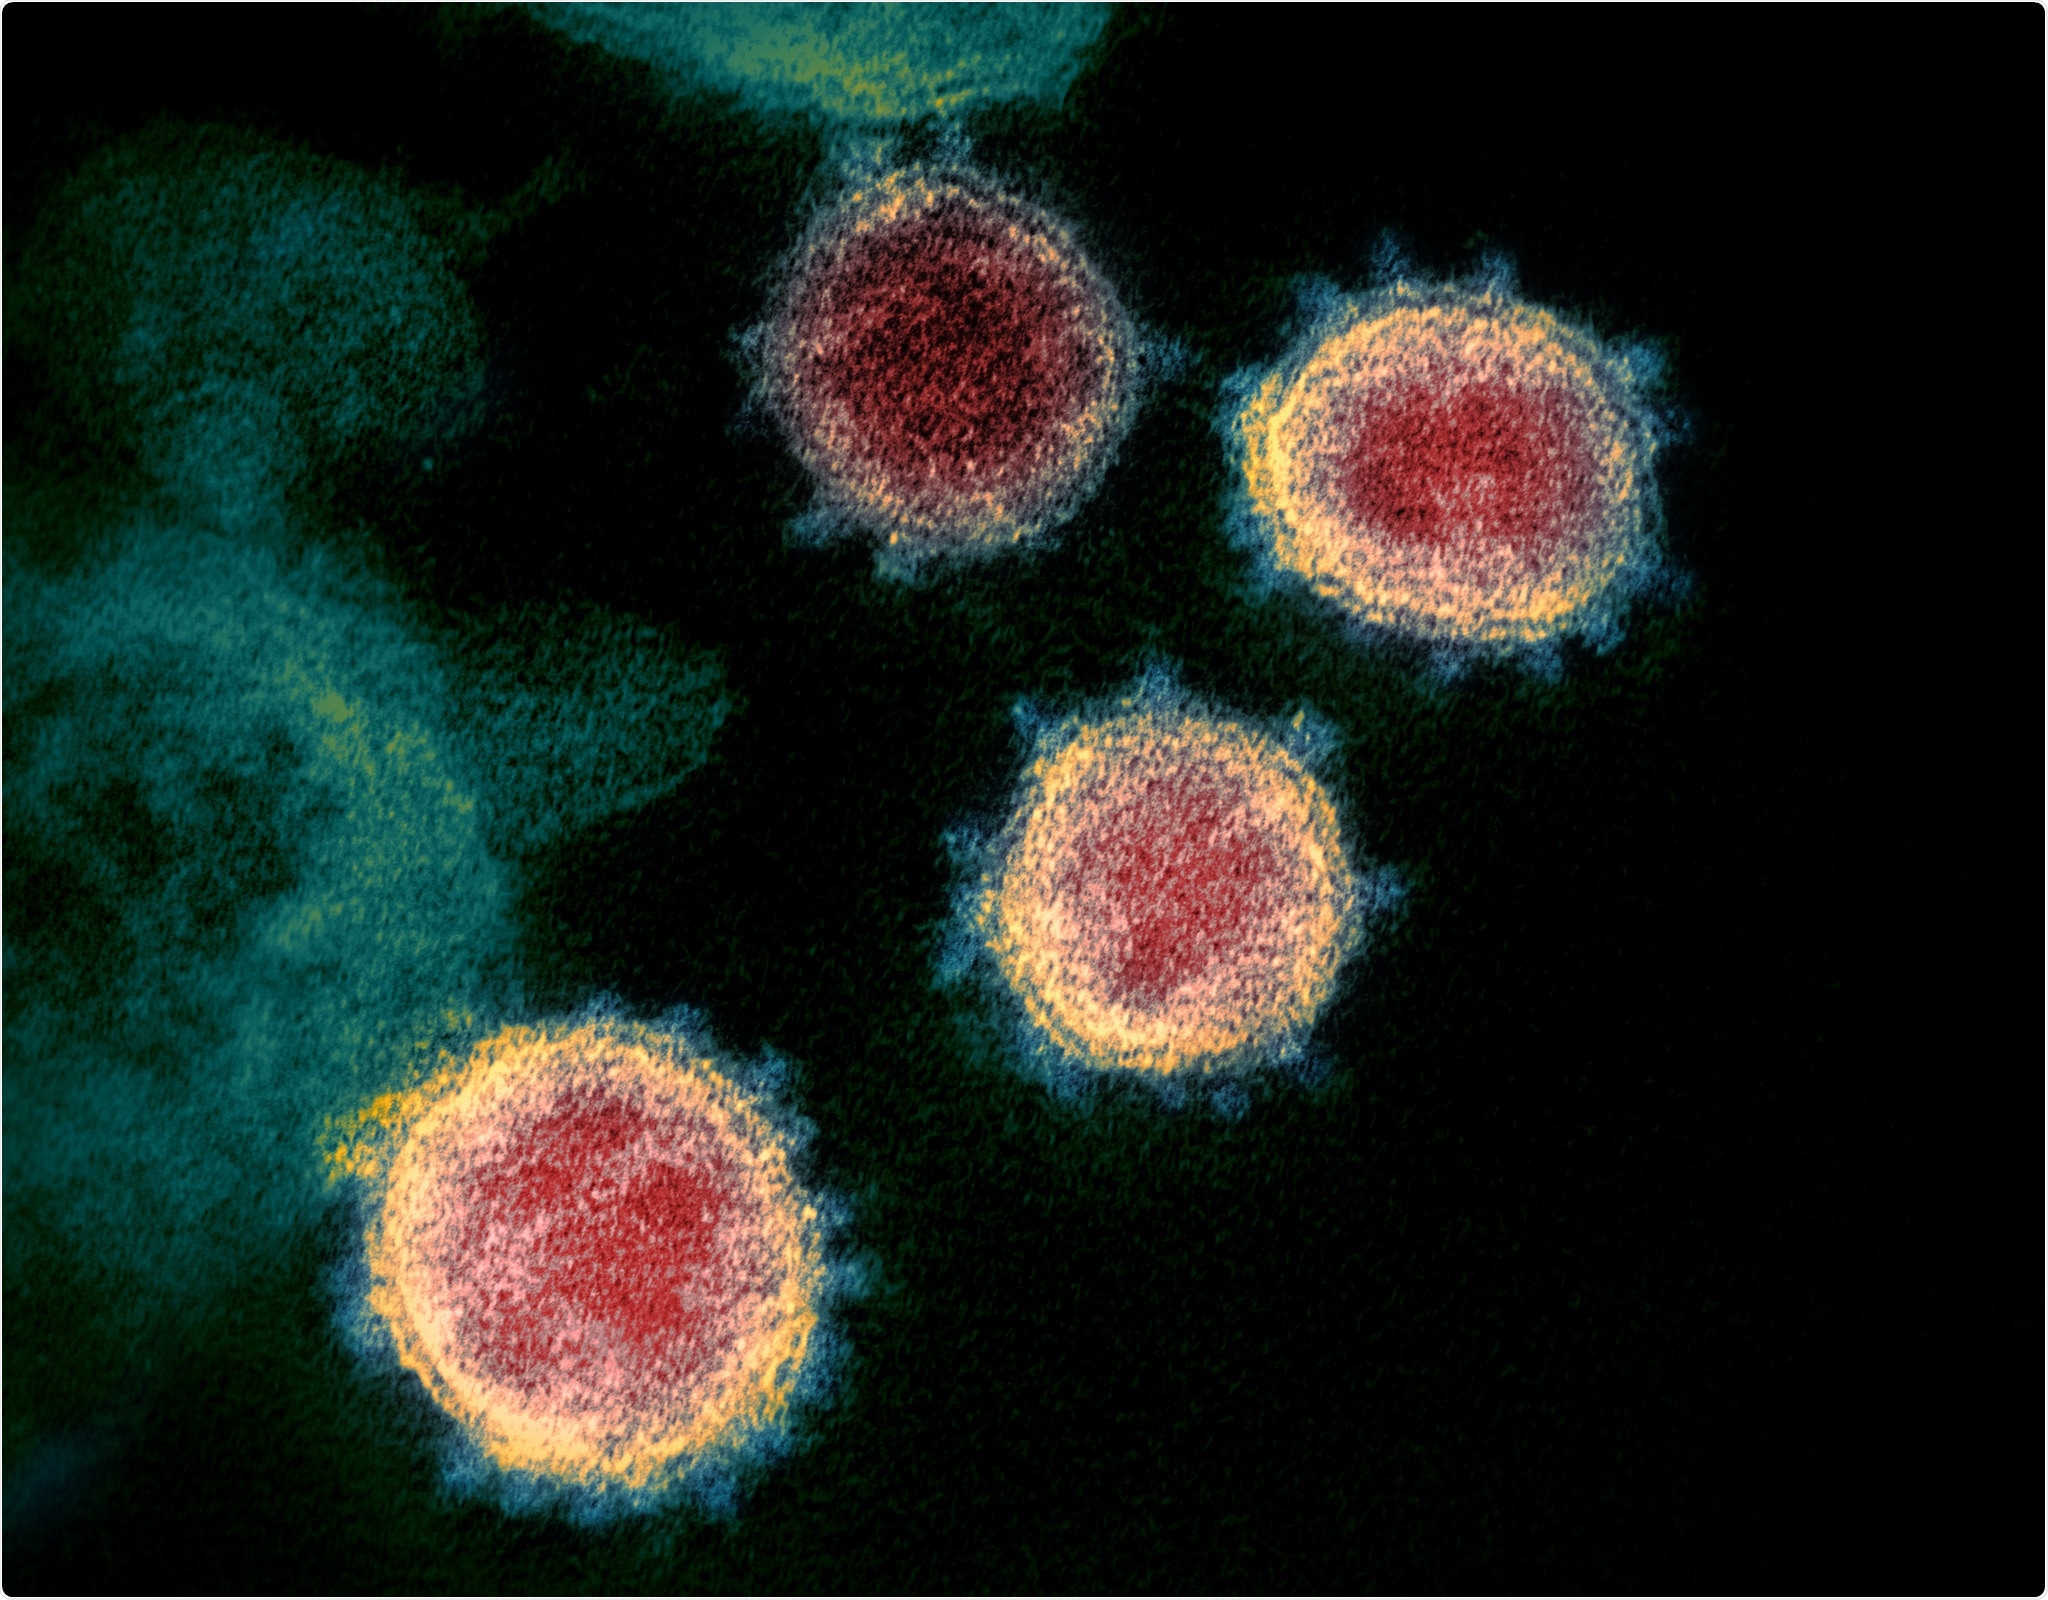 transmission electron microscope image shows SARS-CoV-2—also known as 2019-nCoV, the virus that causes COVID-19—isolated from a patient in the U.S. Virus particles are shown emerging from the surface of cells cultured in the lab. The spikes on the outer edge of the virus particles give coronaviruses their name, crown-like. Image captured and colorized at NIAID